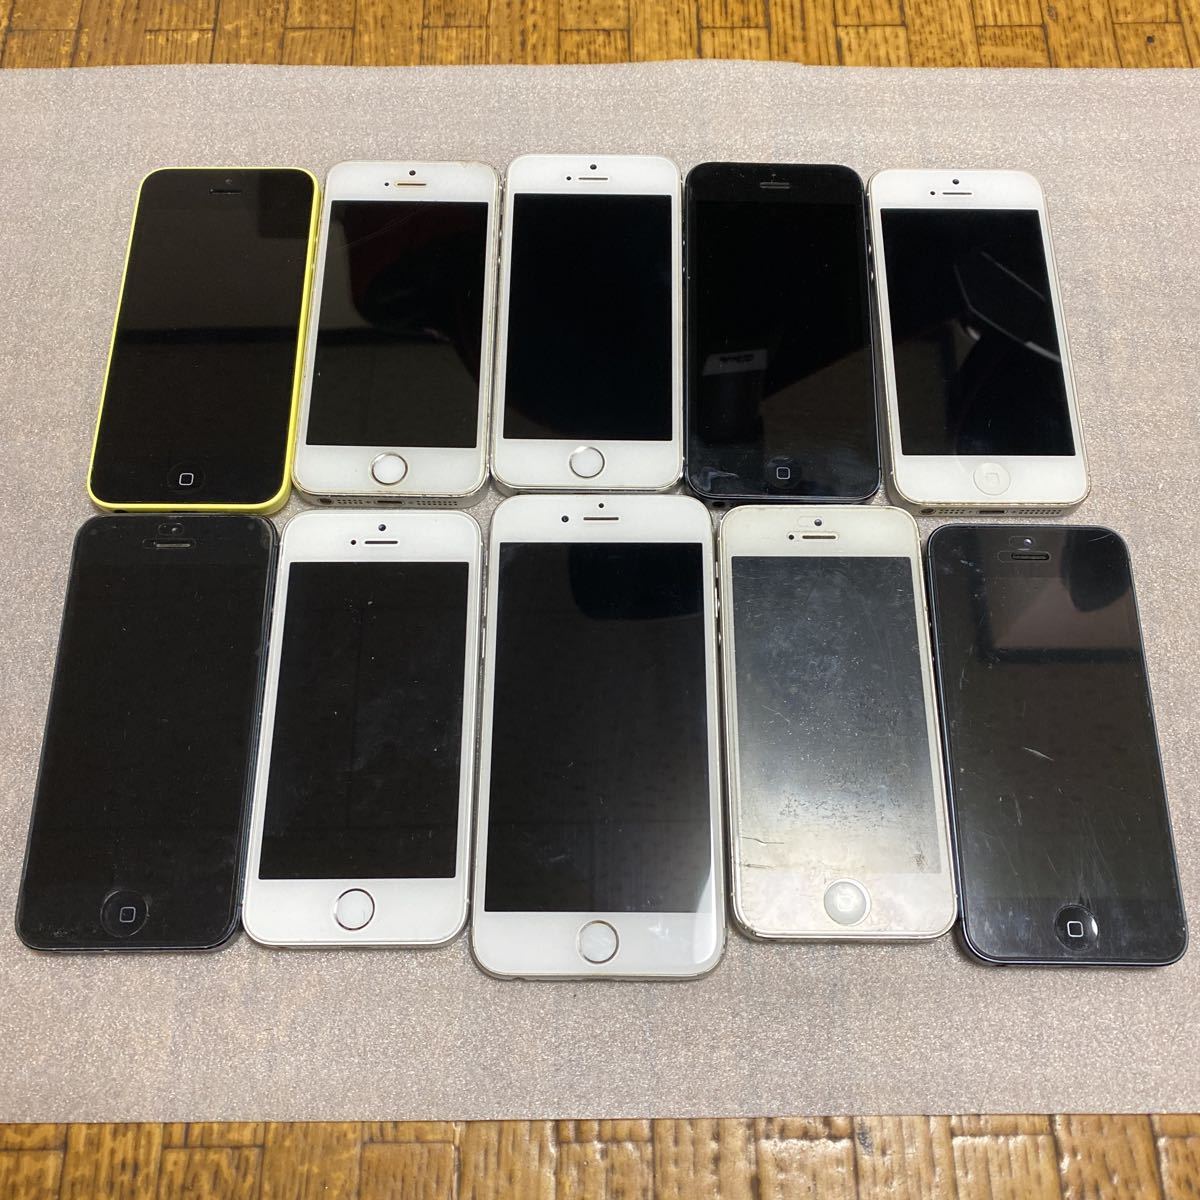 Apple iPhone 本体　iphone6 A1586, iphone SE A1723,A1429,A1453 等　大量　計10点 まとめて　まとめ　ジャンク品　①_画像2